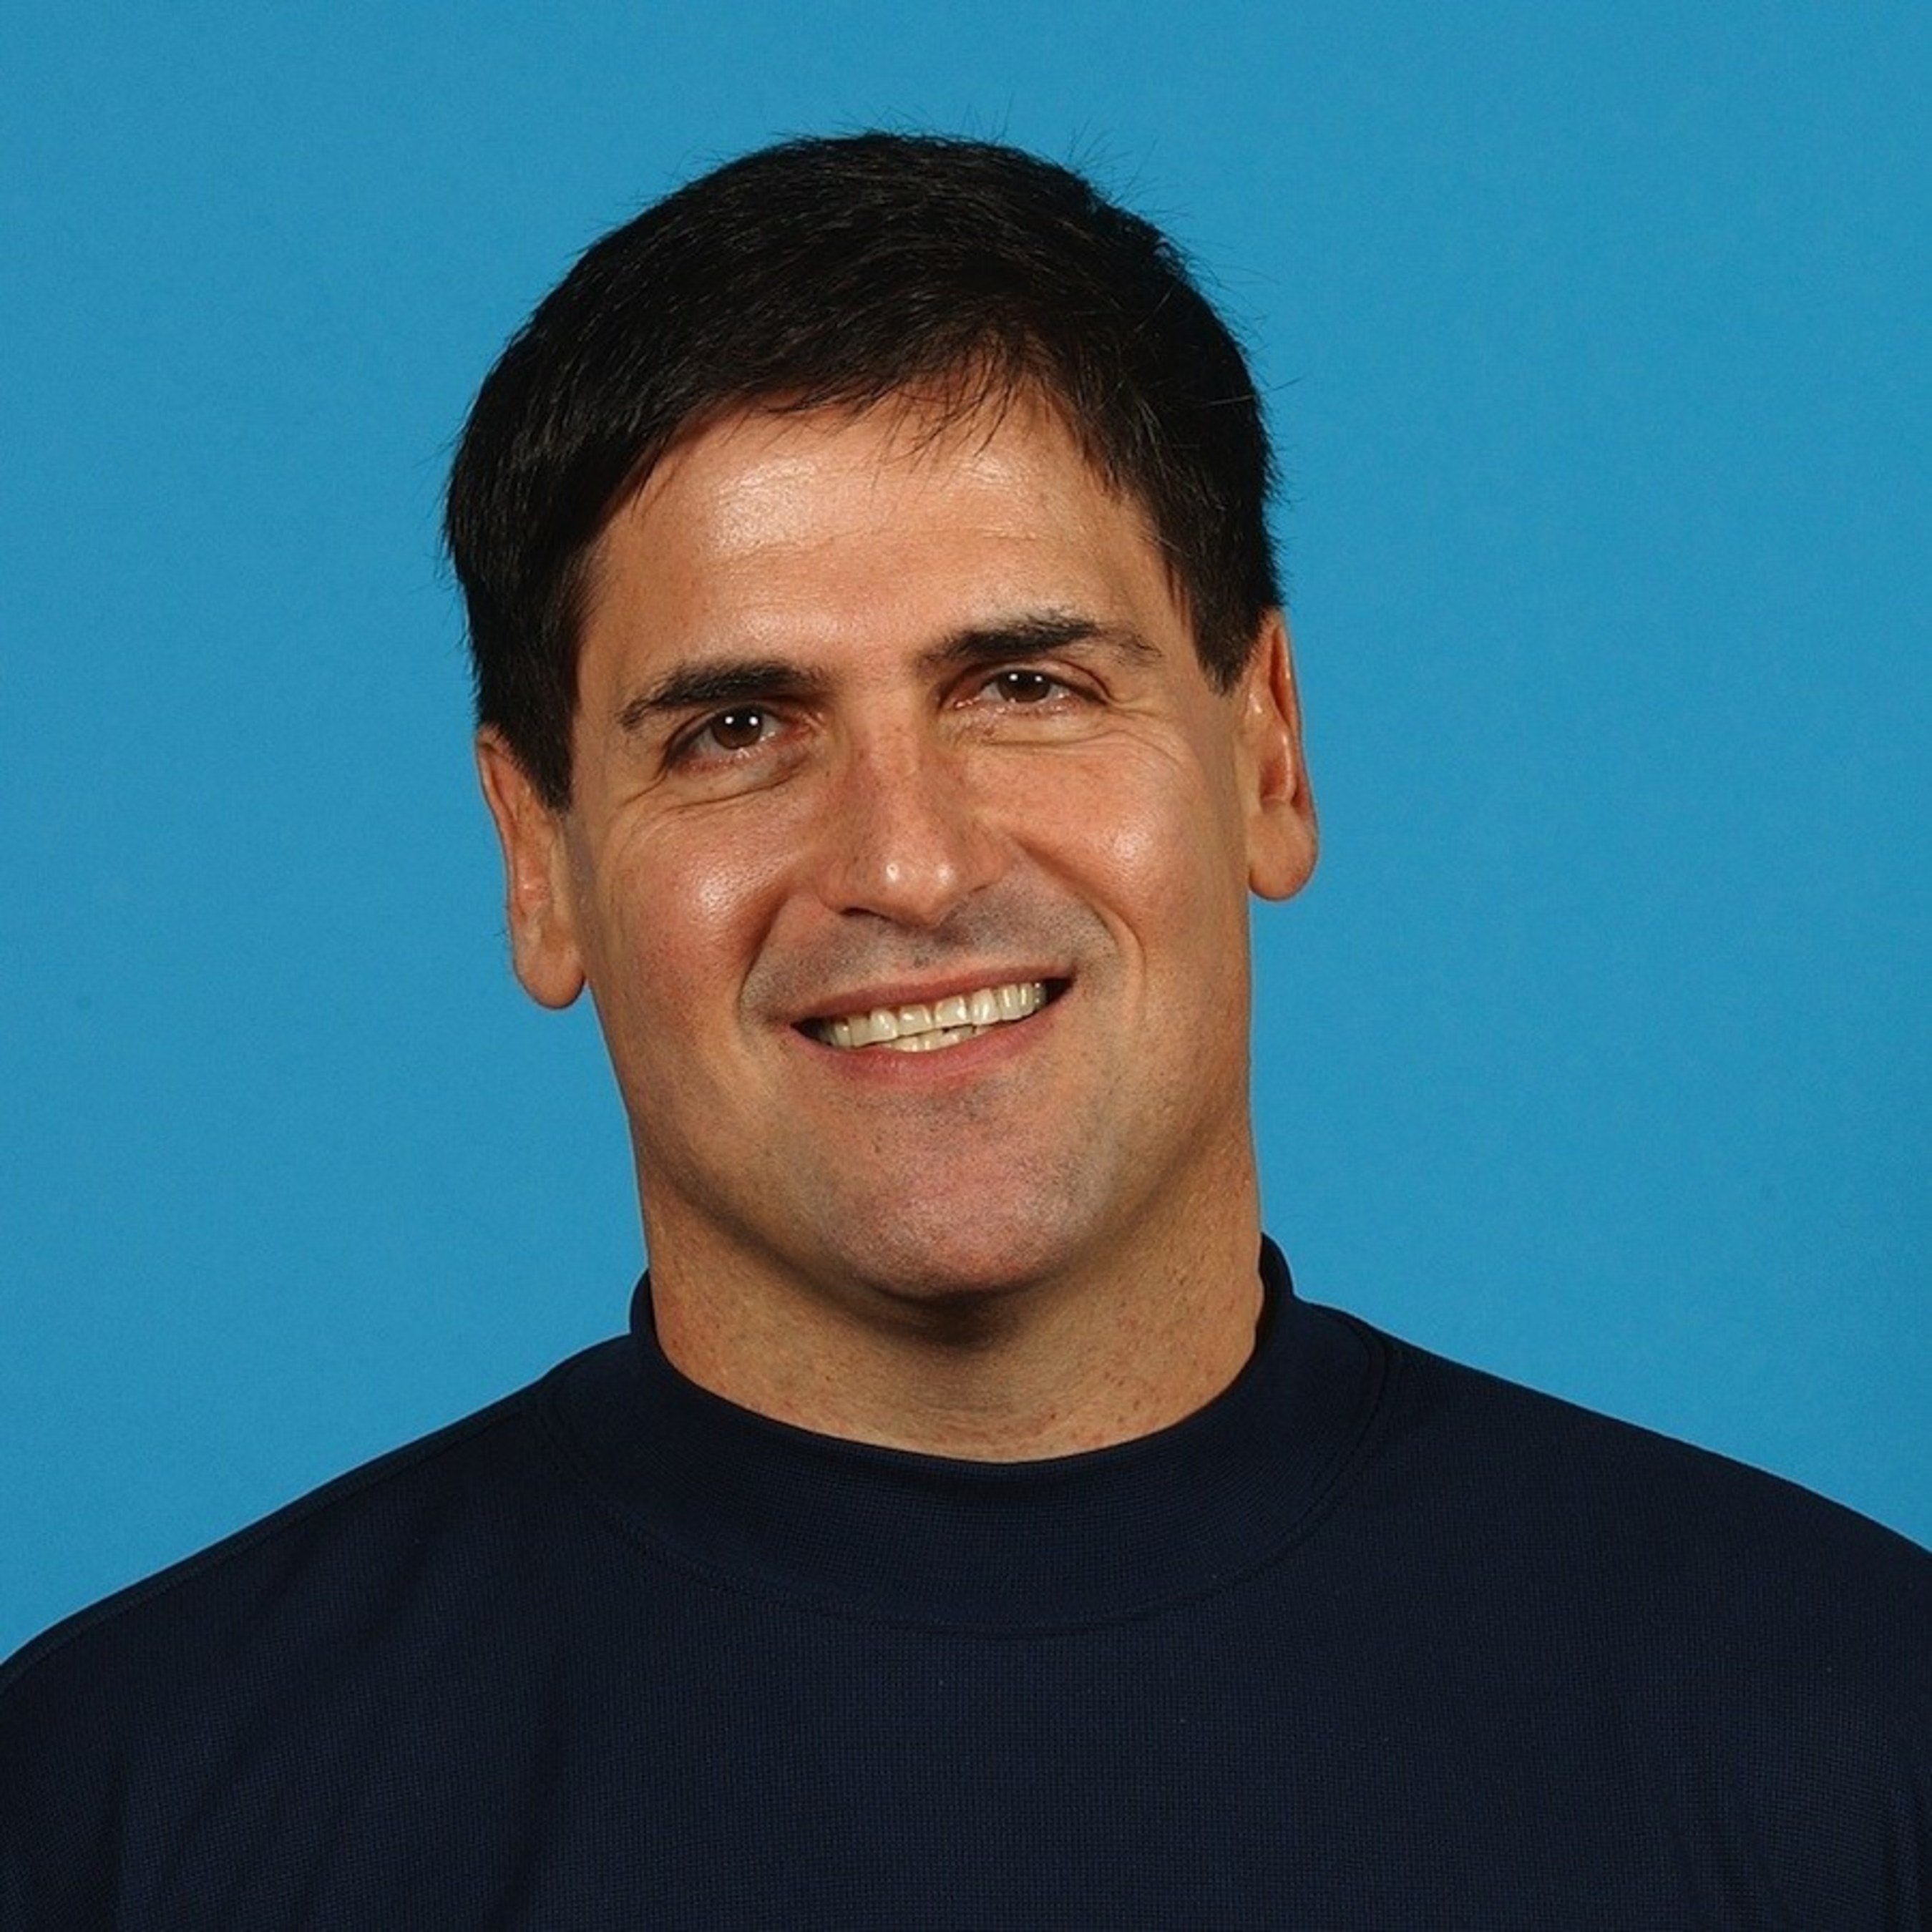 Mark Cuban will emcee Impact Pediatric Health at SXSW Interactive in March at SXSW Interactive.  He is the owner of the Dallas Mavericks and a "shark" on ABC's Shark Tank. Mark is also an active investor and entrepreneur.